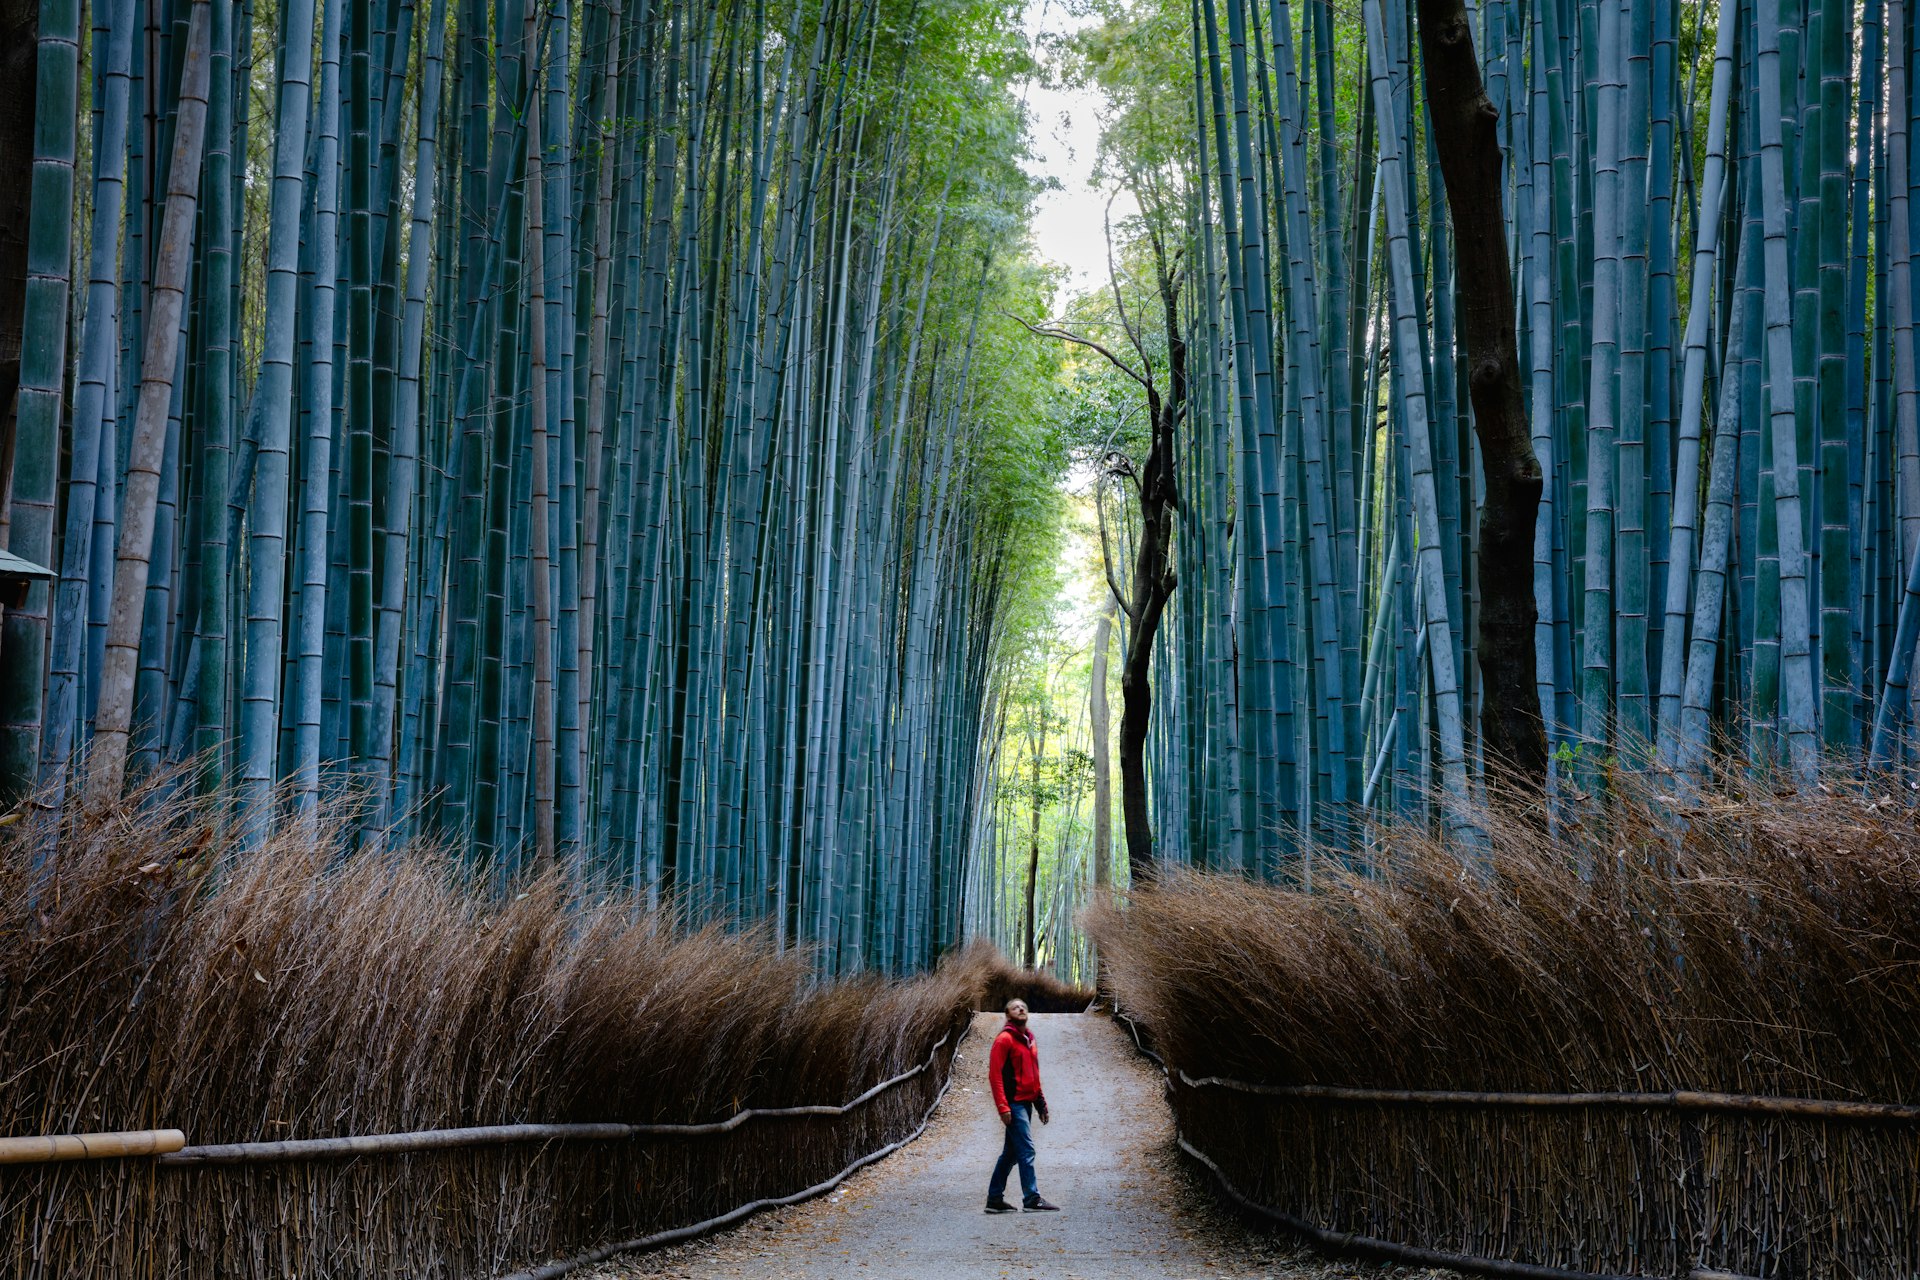 Man standing in a bamboo forest looking up at the incredibly tall grass